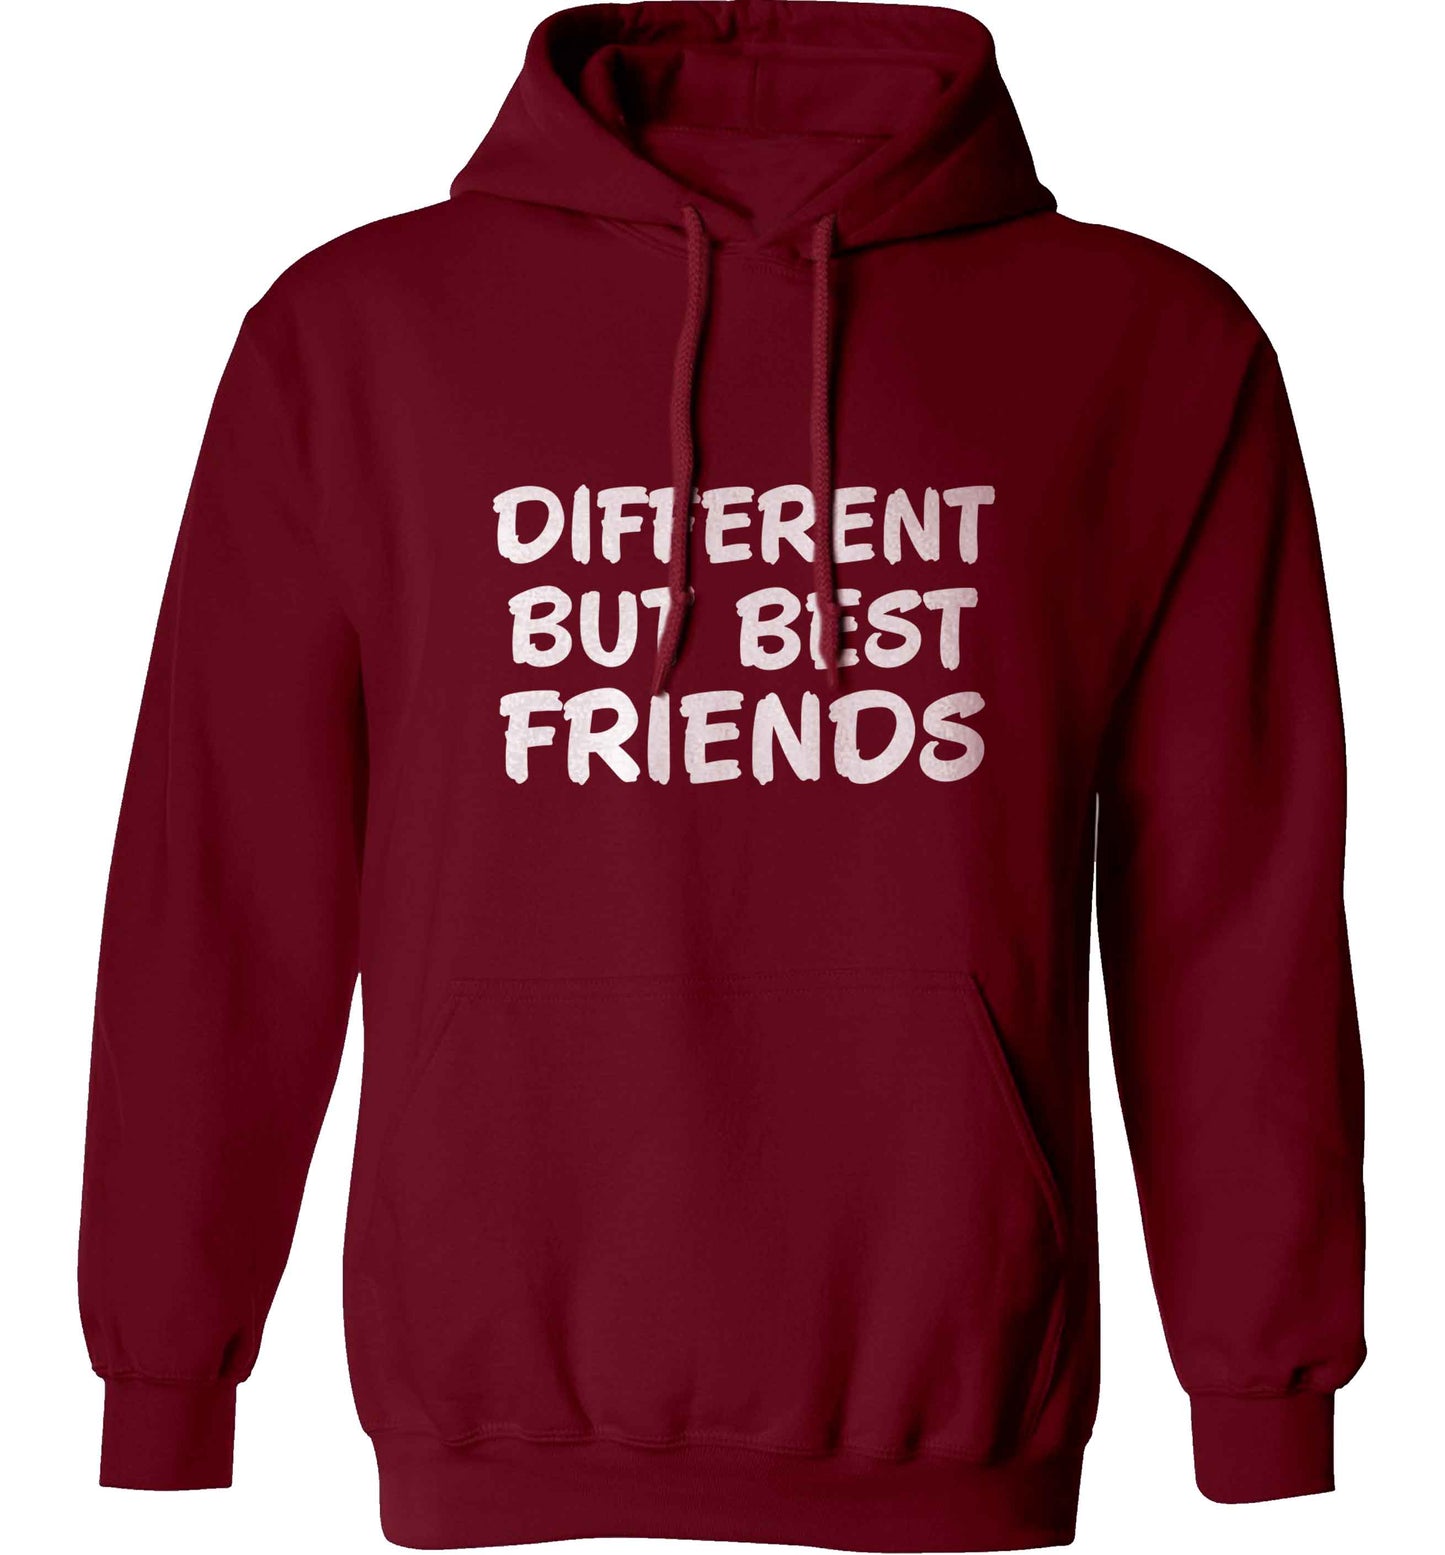 Different but best friends adults unisex maroon hoodie 2XL